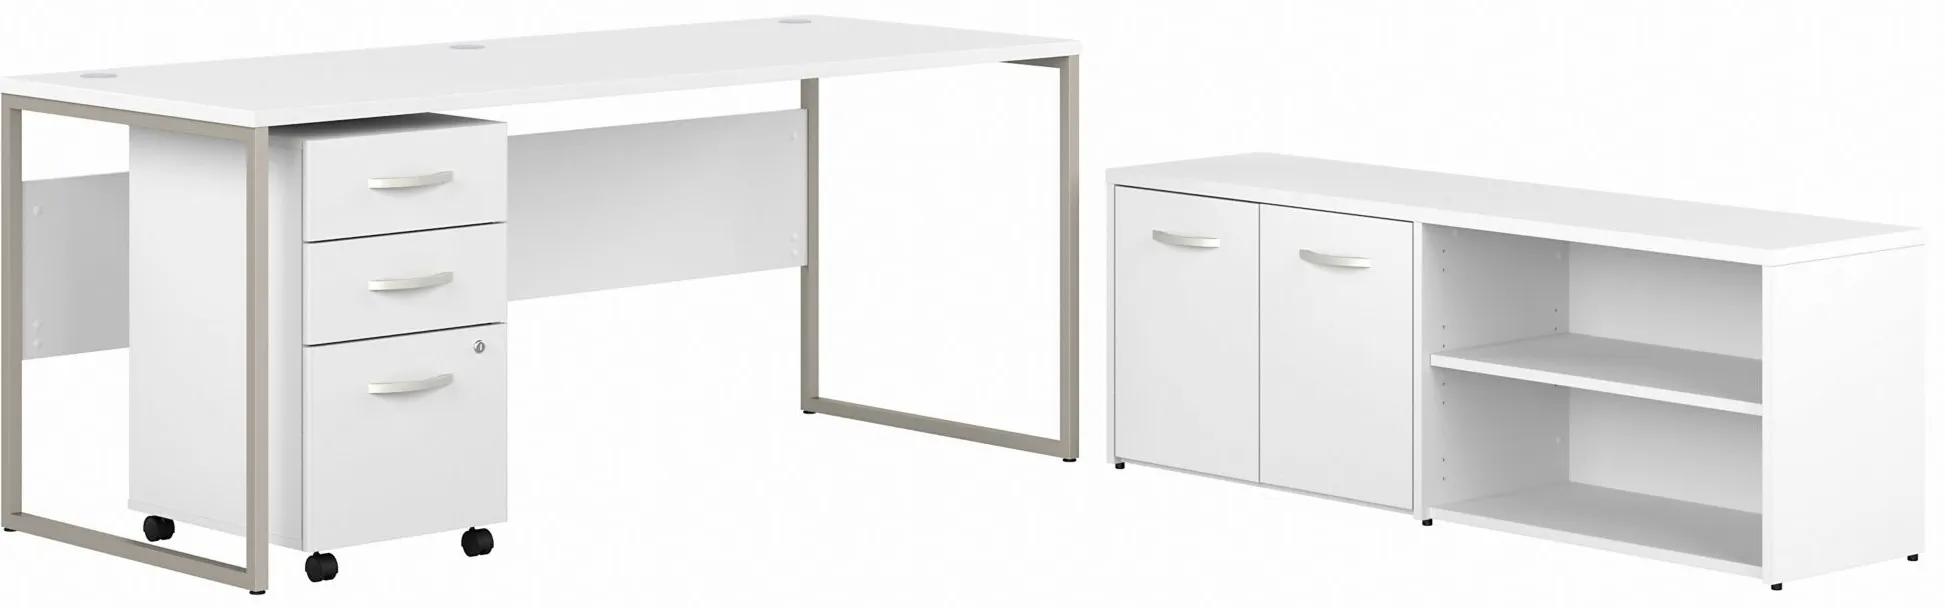 Steinbeck Workstation Desk w/ Credenza and File Cabinet in White by Bush Industries